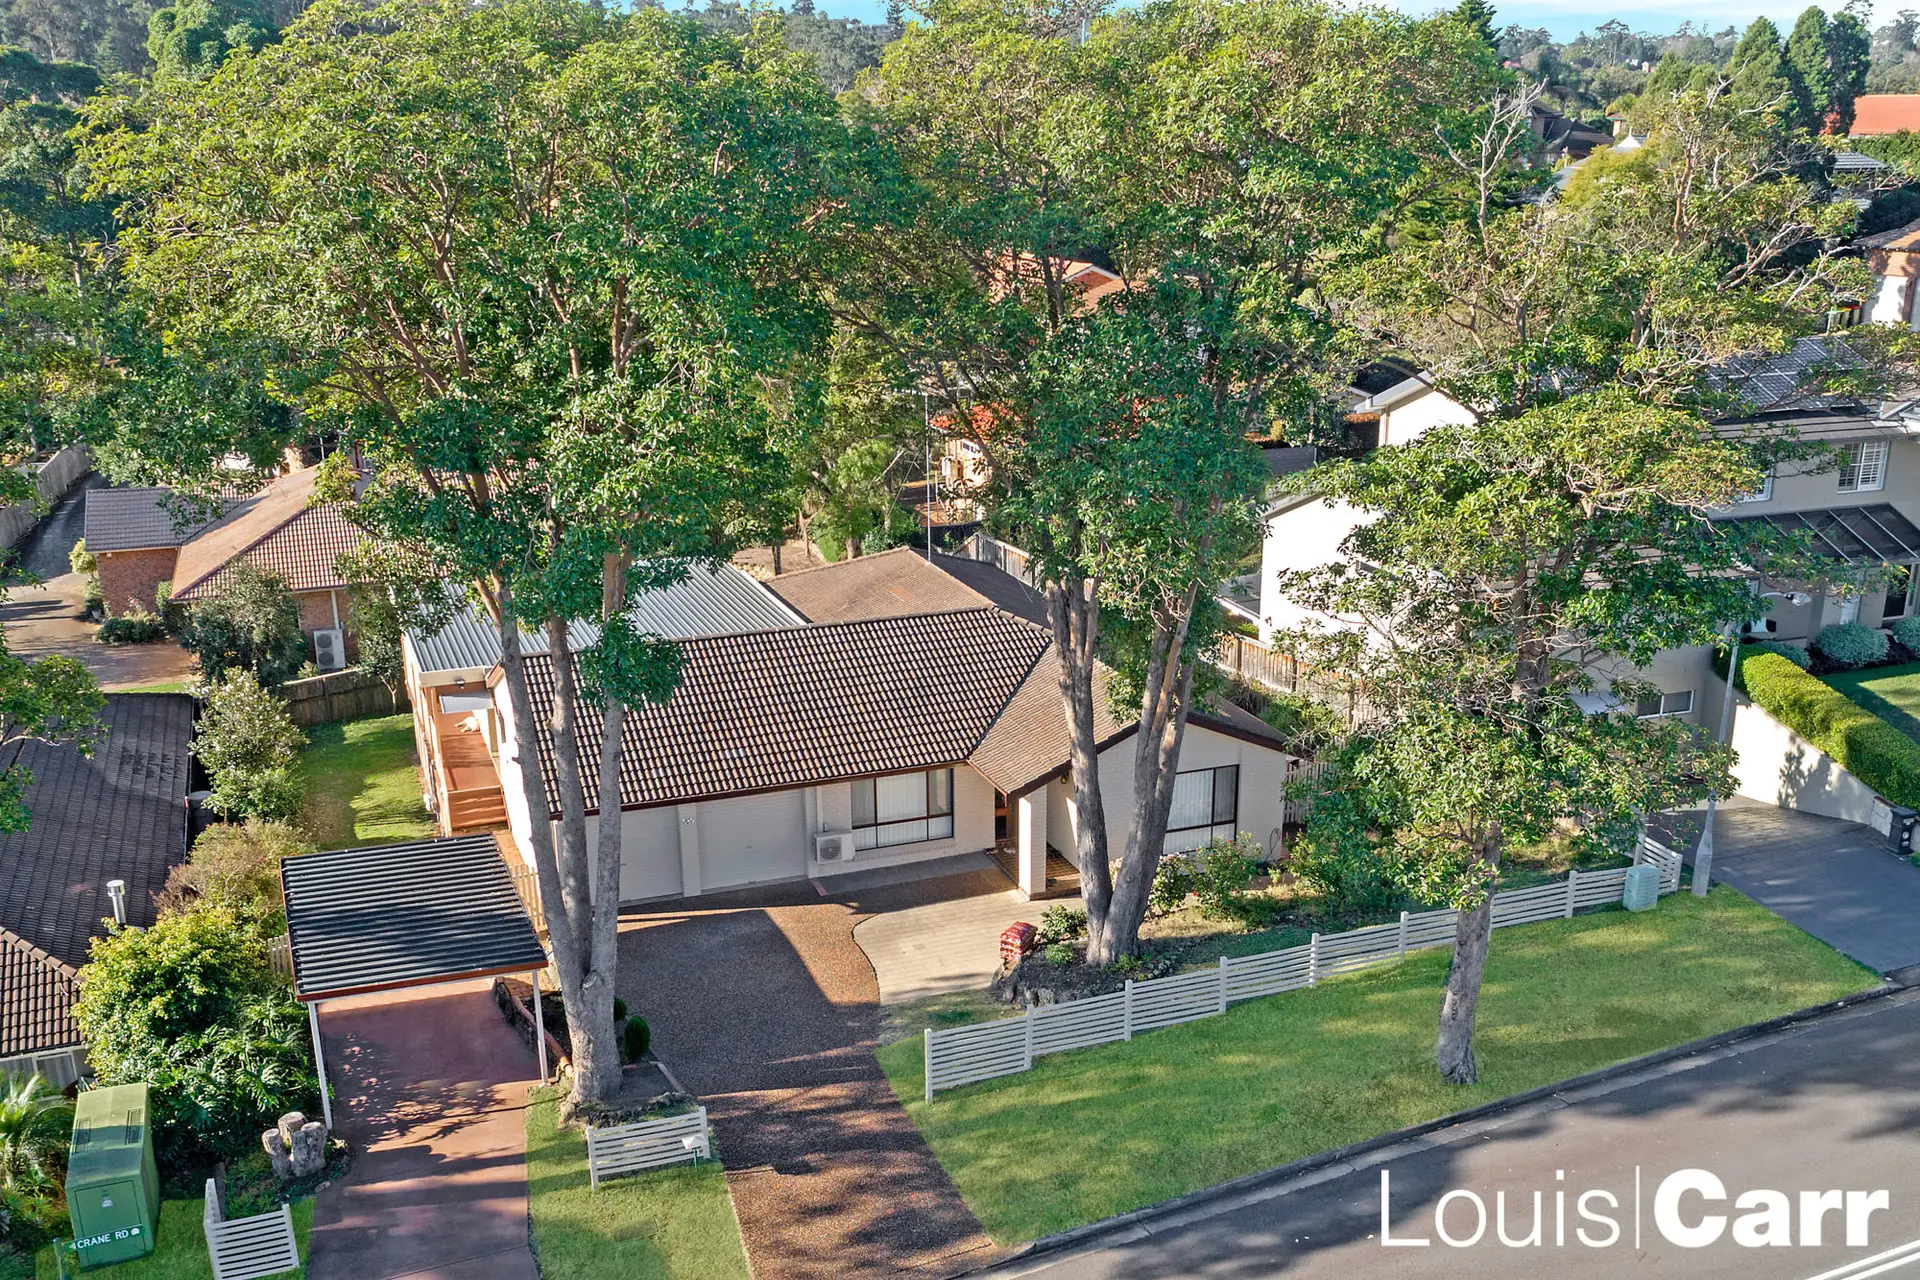 Photo #5: 101 Crane Road, Castle Hill - Sold by Louis Carr Real Estate